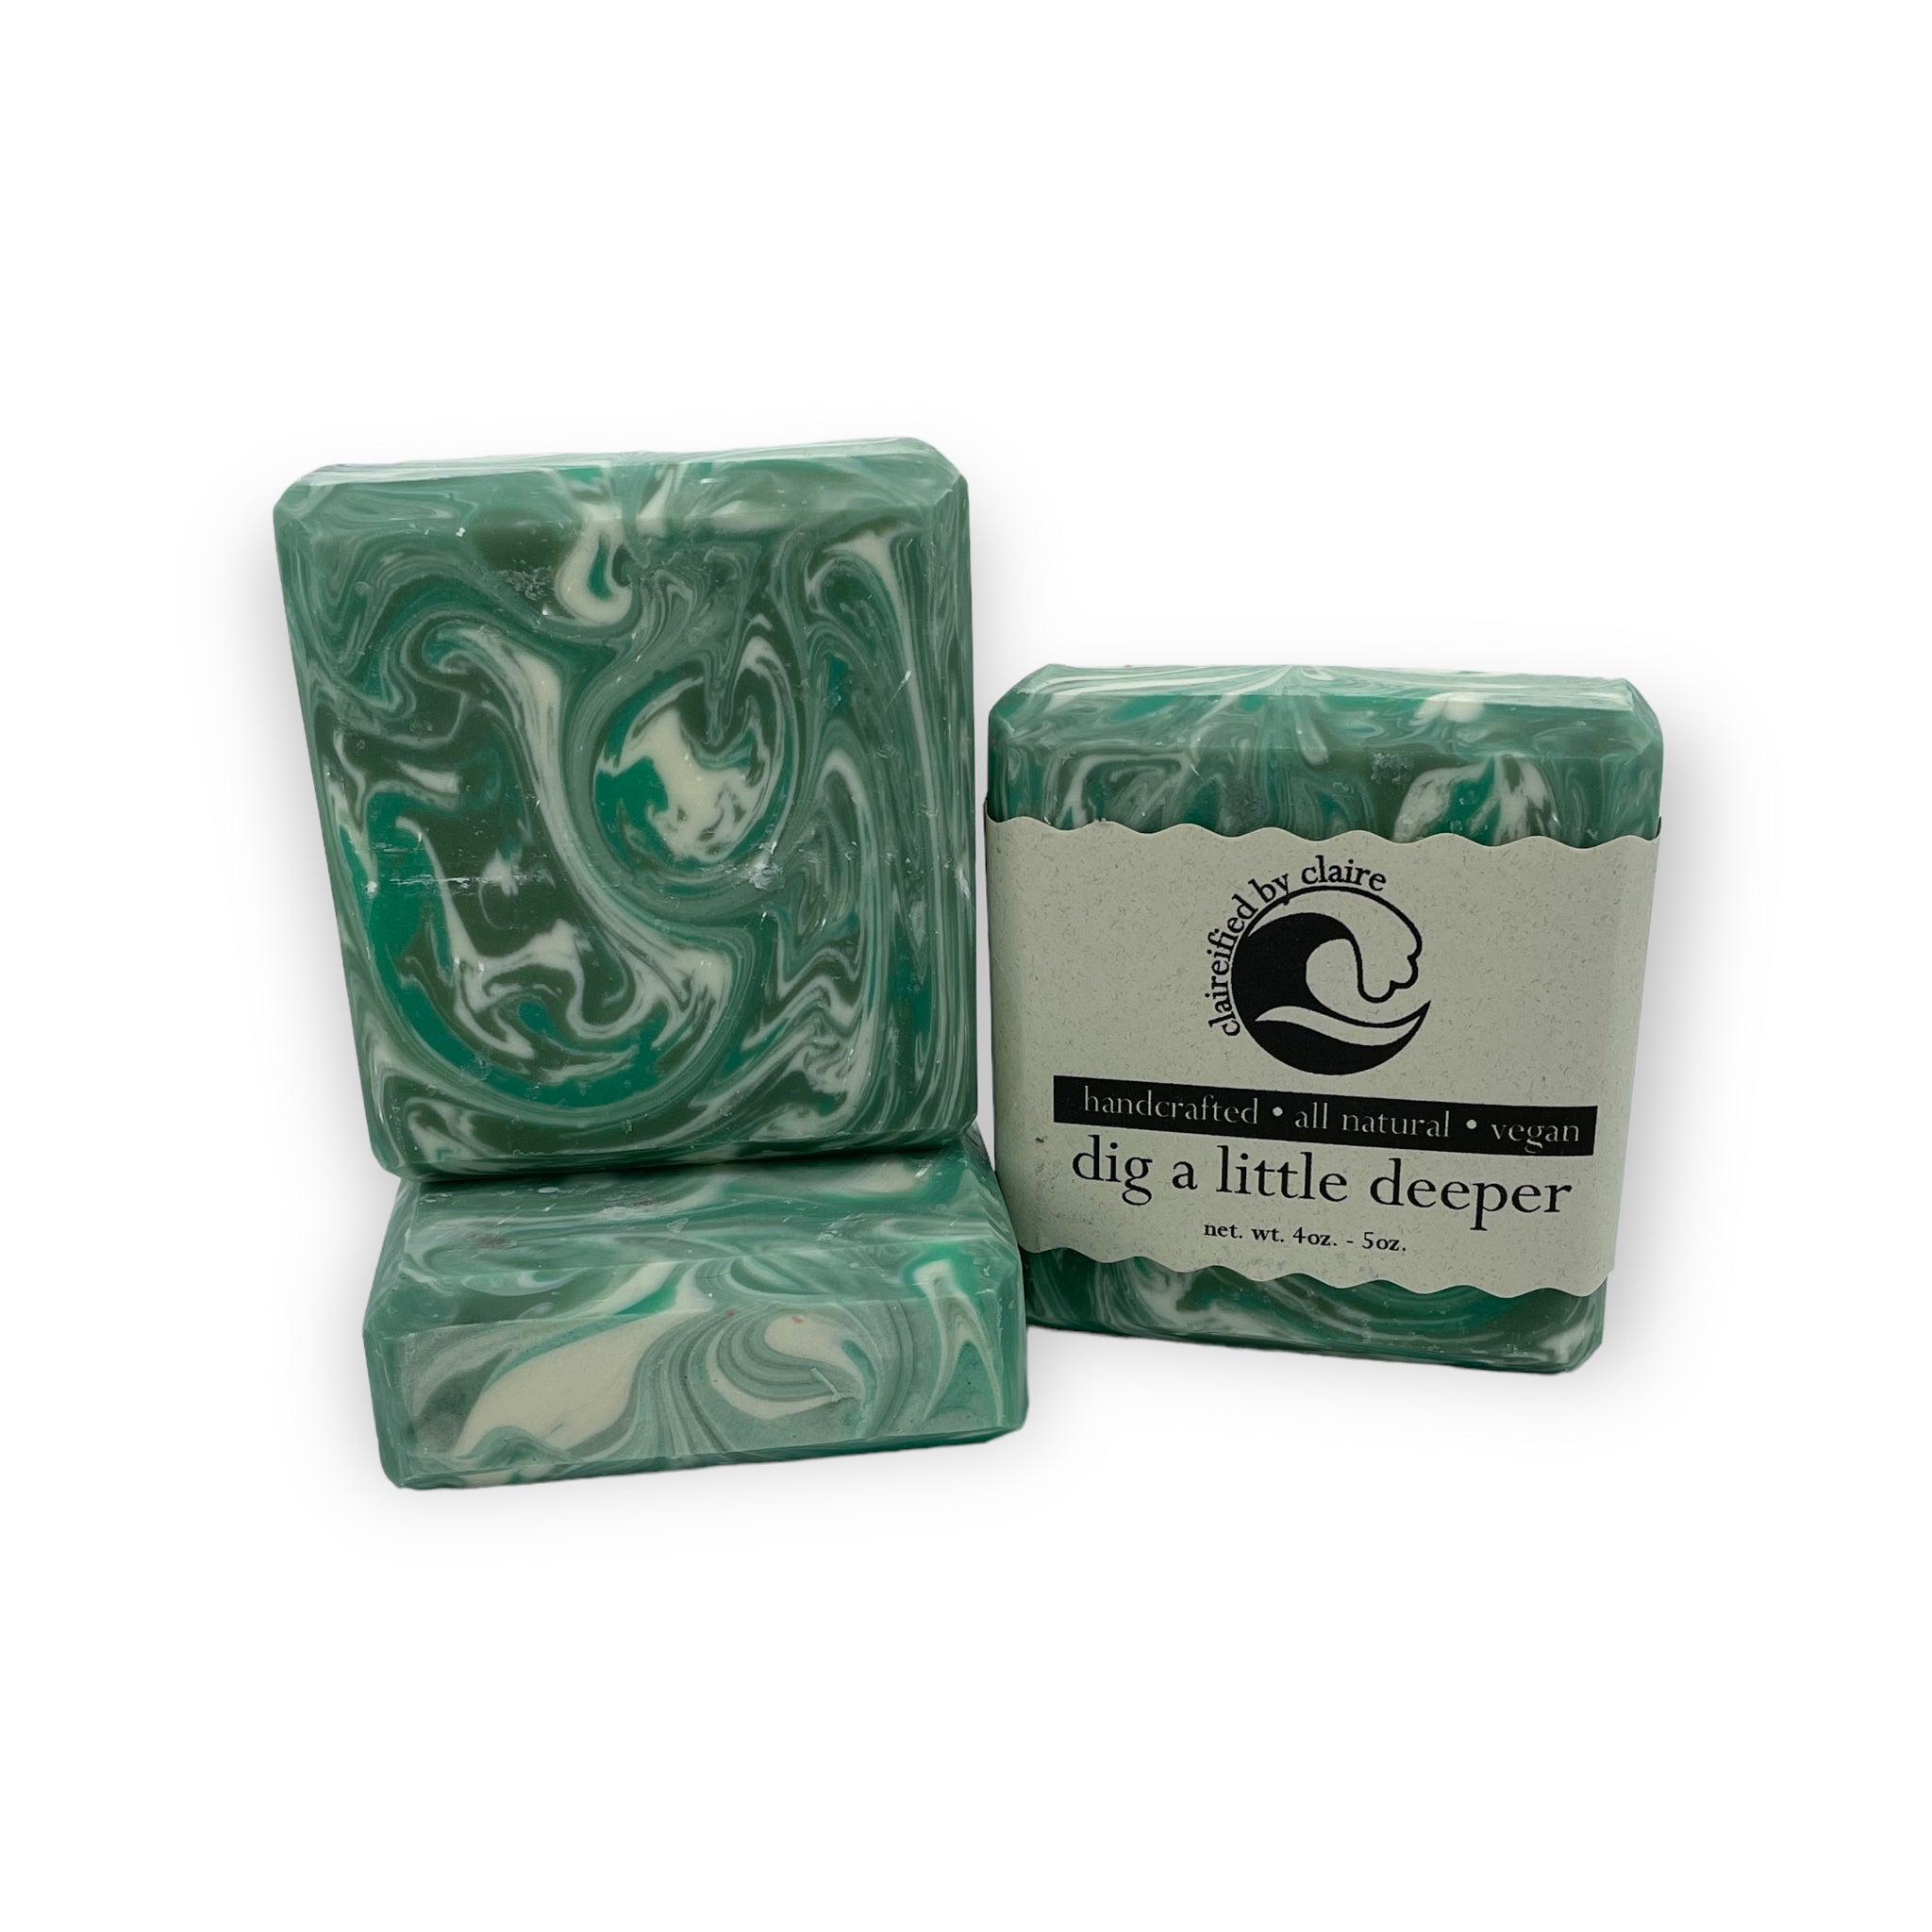 Dig A Little Deeper handmade soap inspired by Disney's Tiana from The Princess and the Frog